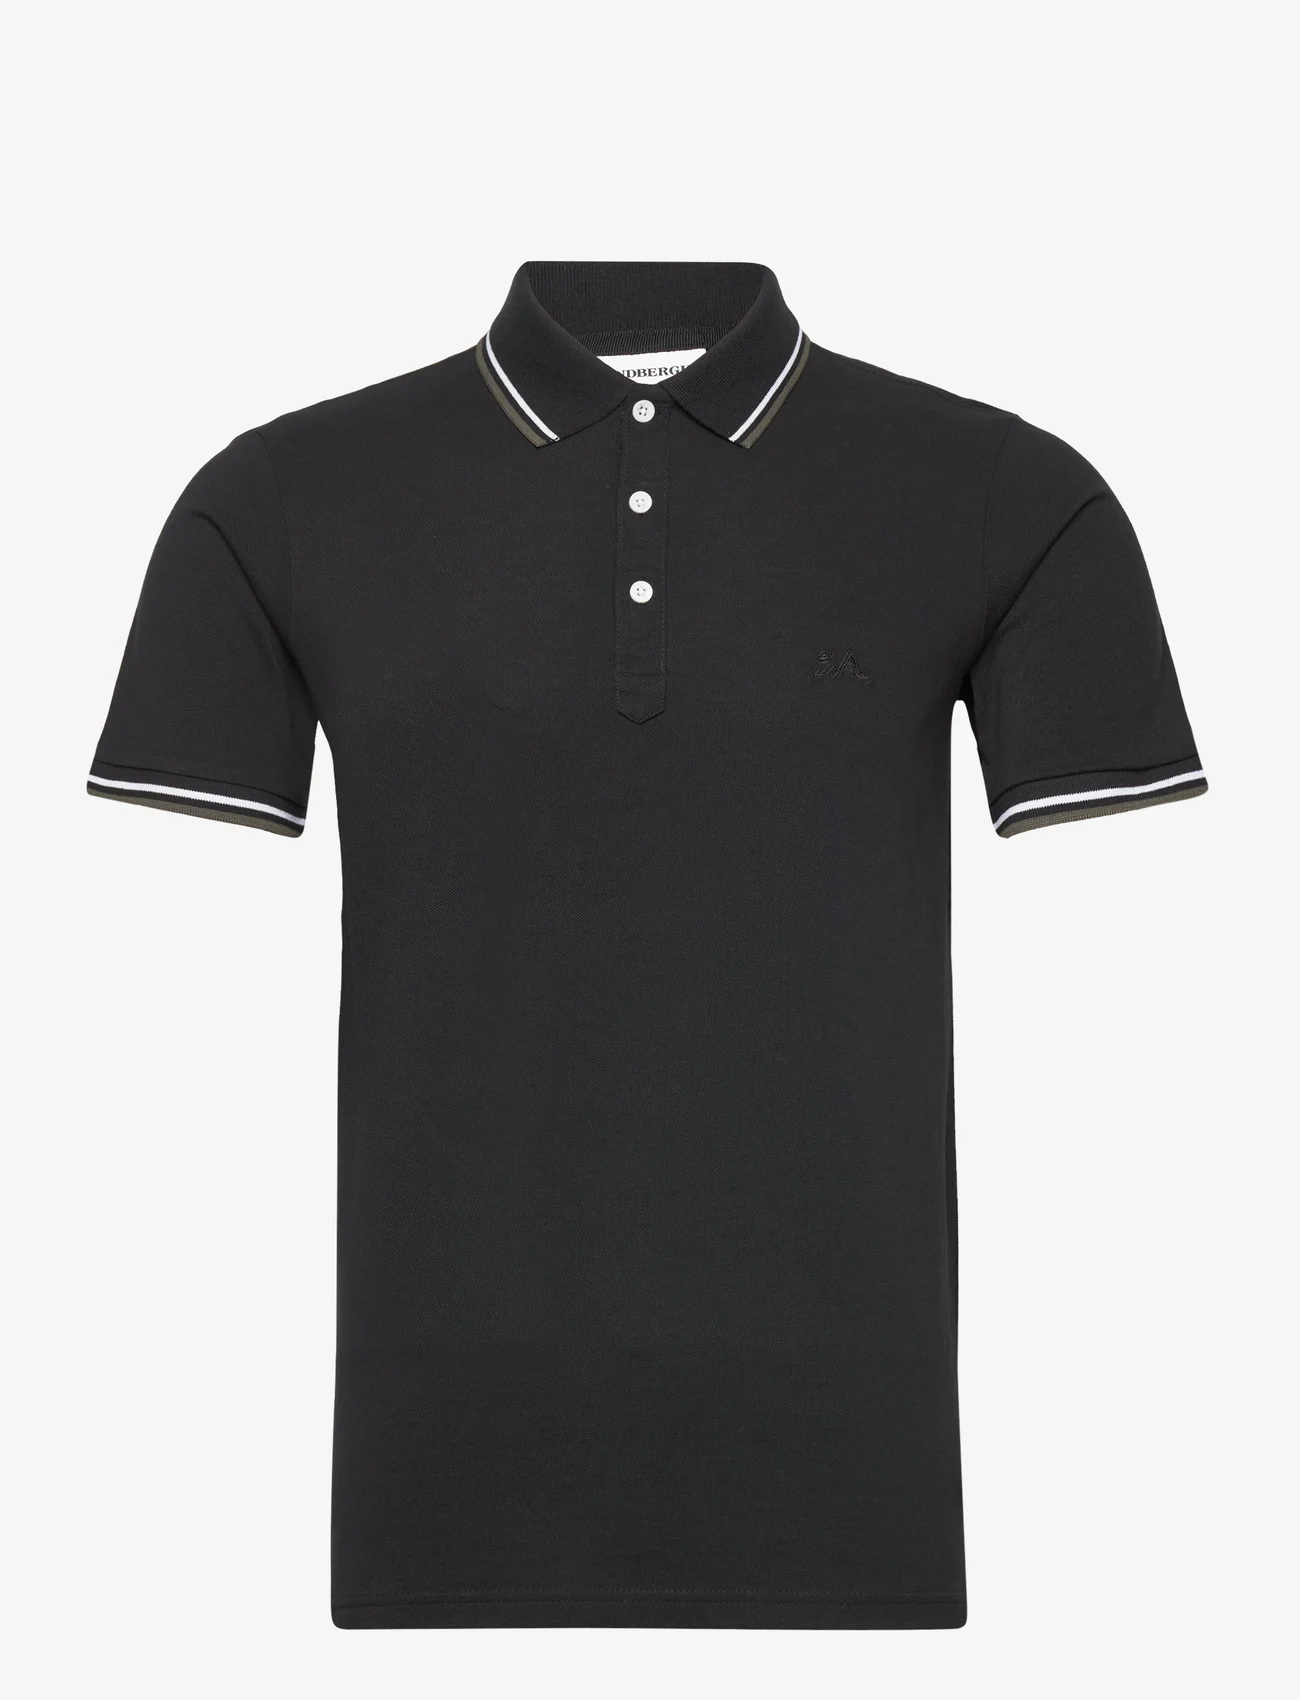 Lindbergh - Polo shirt with contrast piping - alhaisimmat hinnat - black 124 - 0